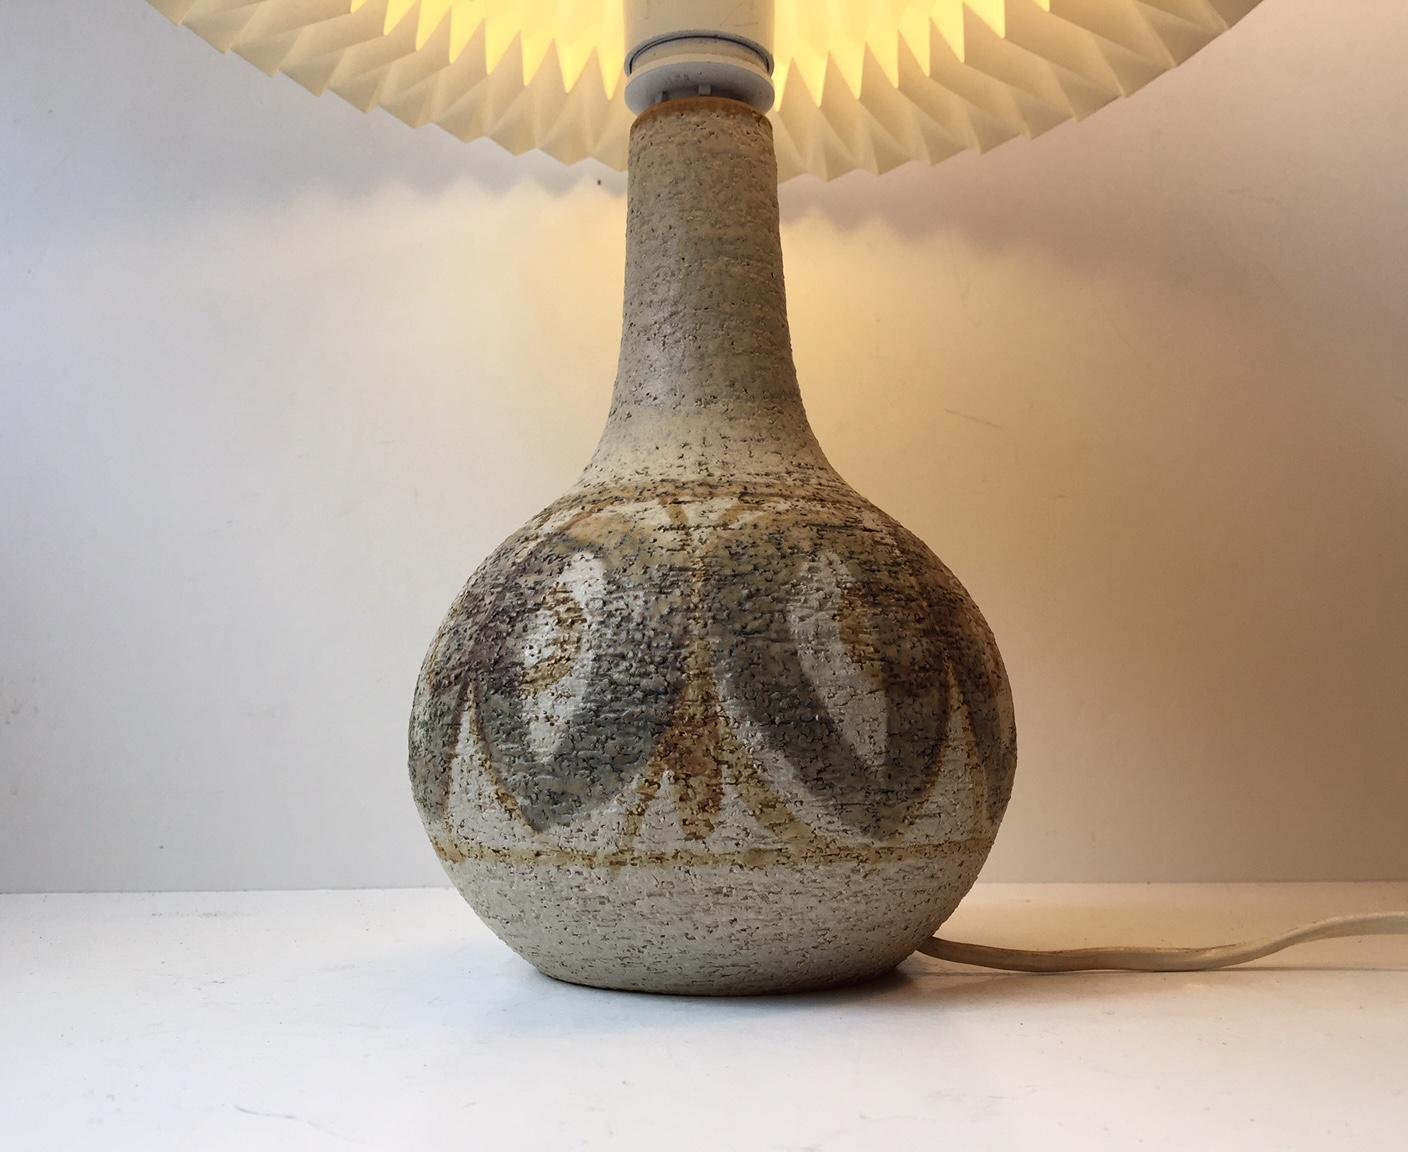 Vintage Danish Støholm stoneware table lamp with floral motif. It was designed by the ceramist's Poul Brandenborg and Noomi Backhausen in the 1970s and manufactured at Søholm in Denmark. Stamped with maker mark. The table lamp is in excellent